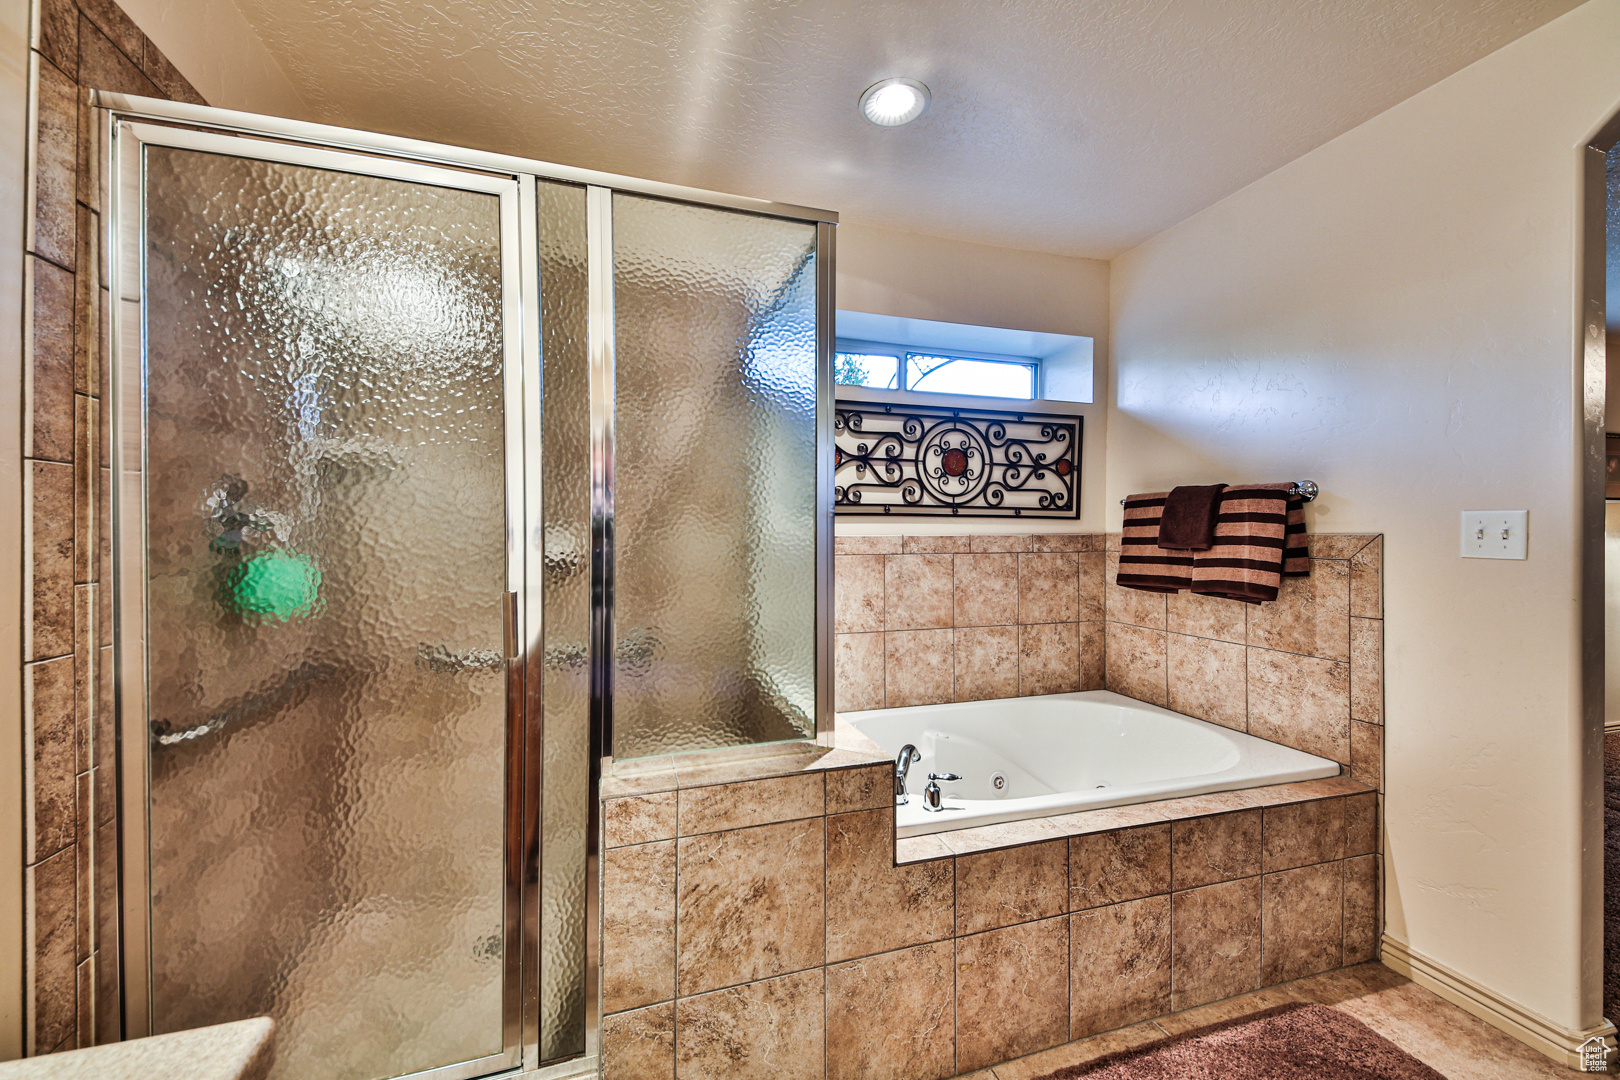 Bathroom with tile flooring and plus walk in shower